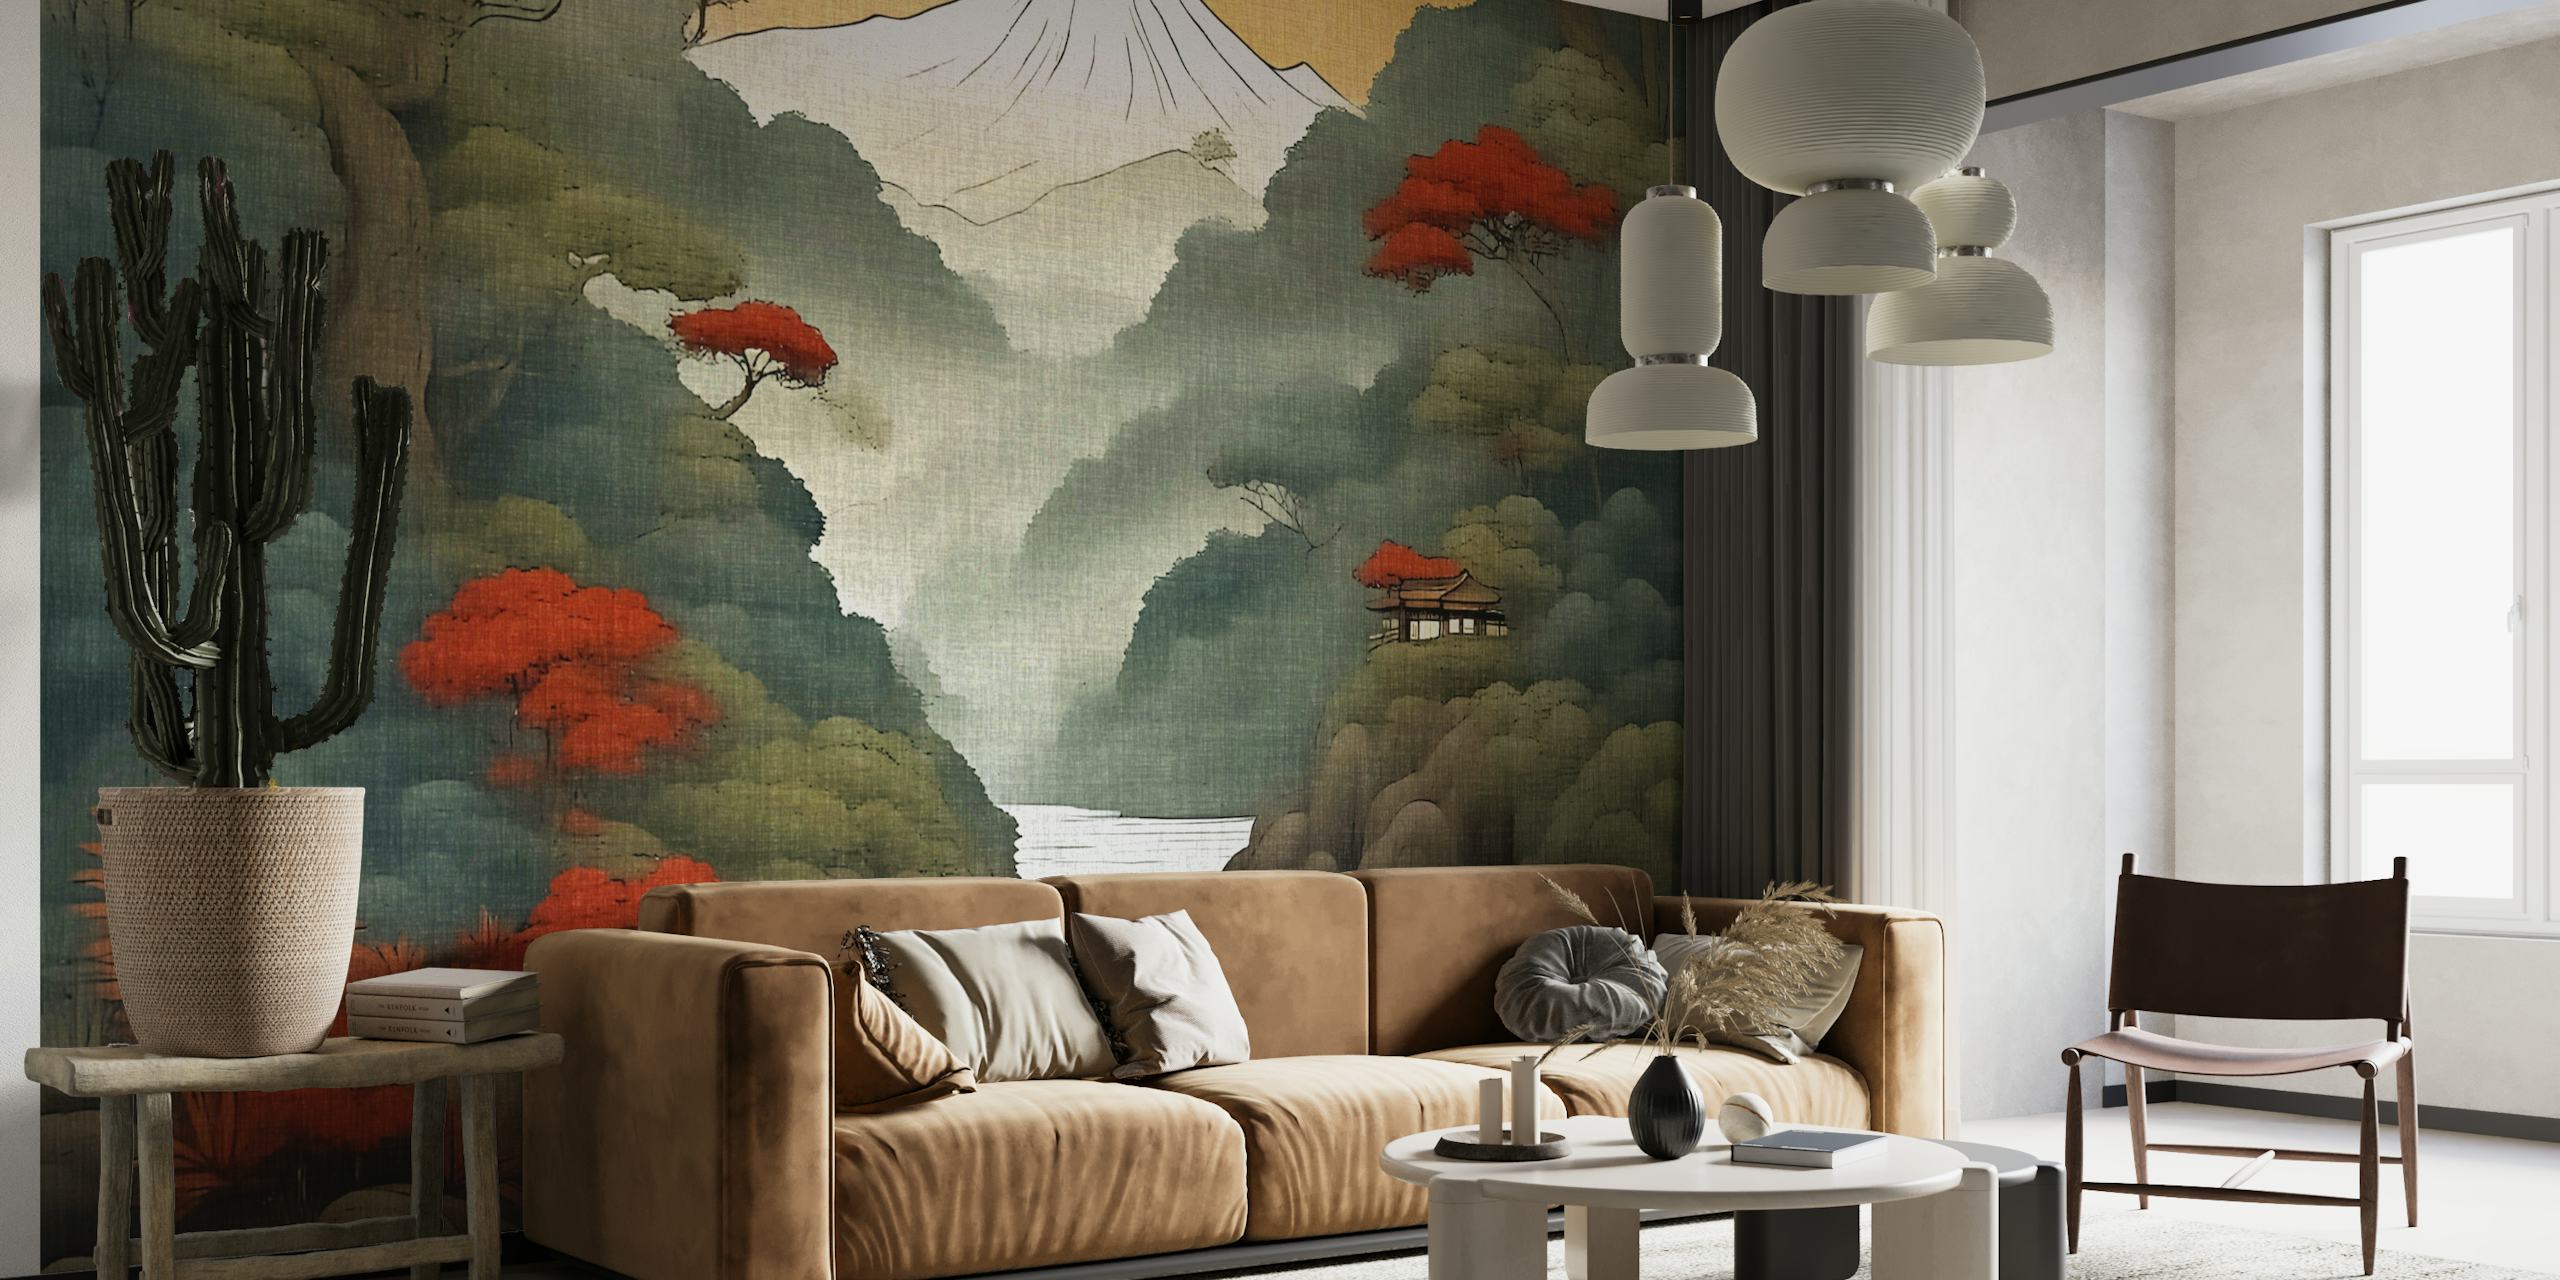 Traditional Japanese landscape wall mural with Mount Fuji, red maple leaves, and a serene river